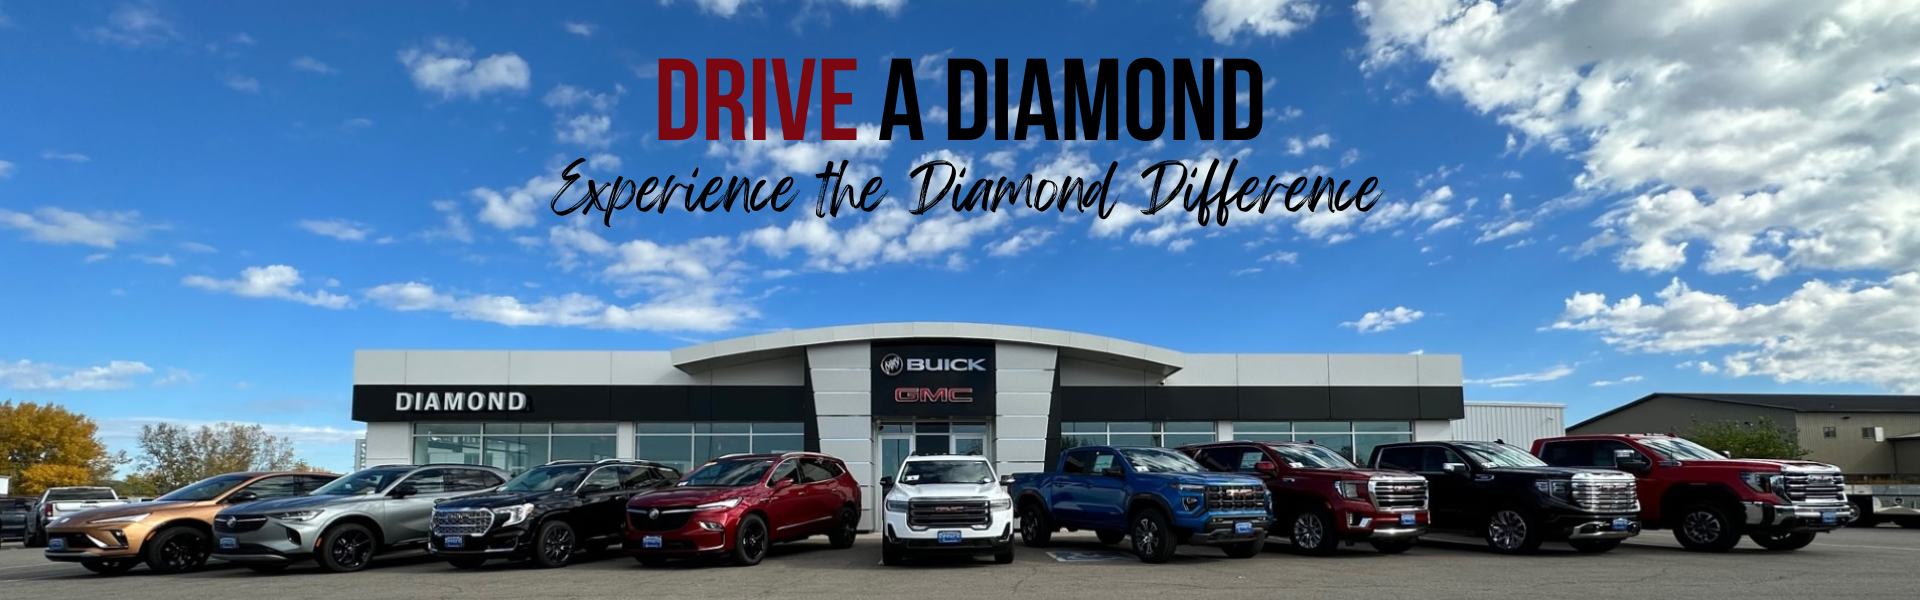 Experience The Diamond Difference